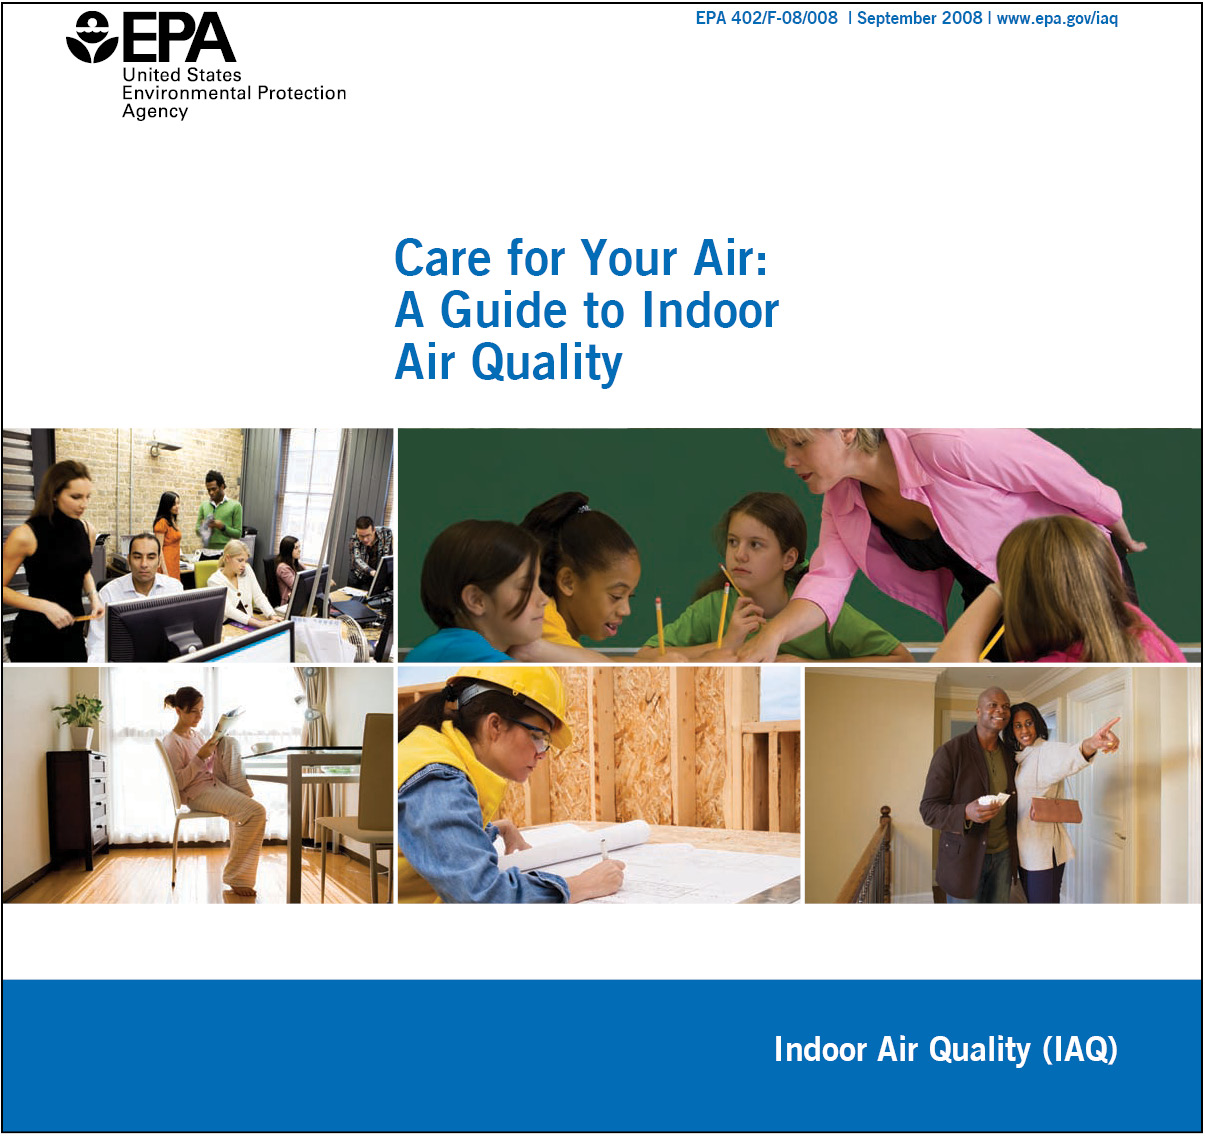  A Guide to Indoor Air Quality